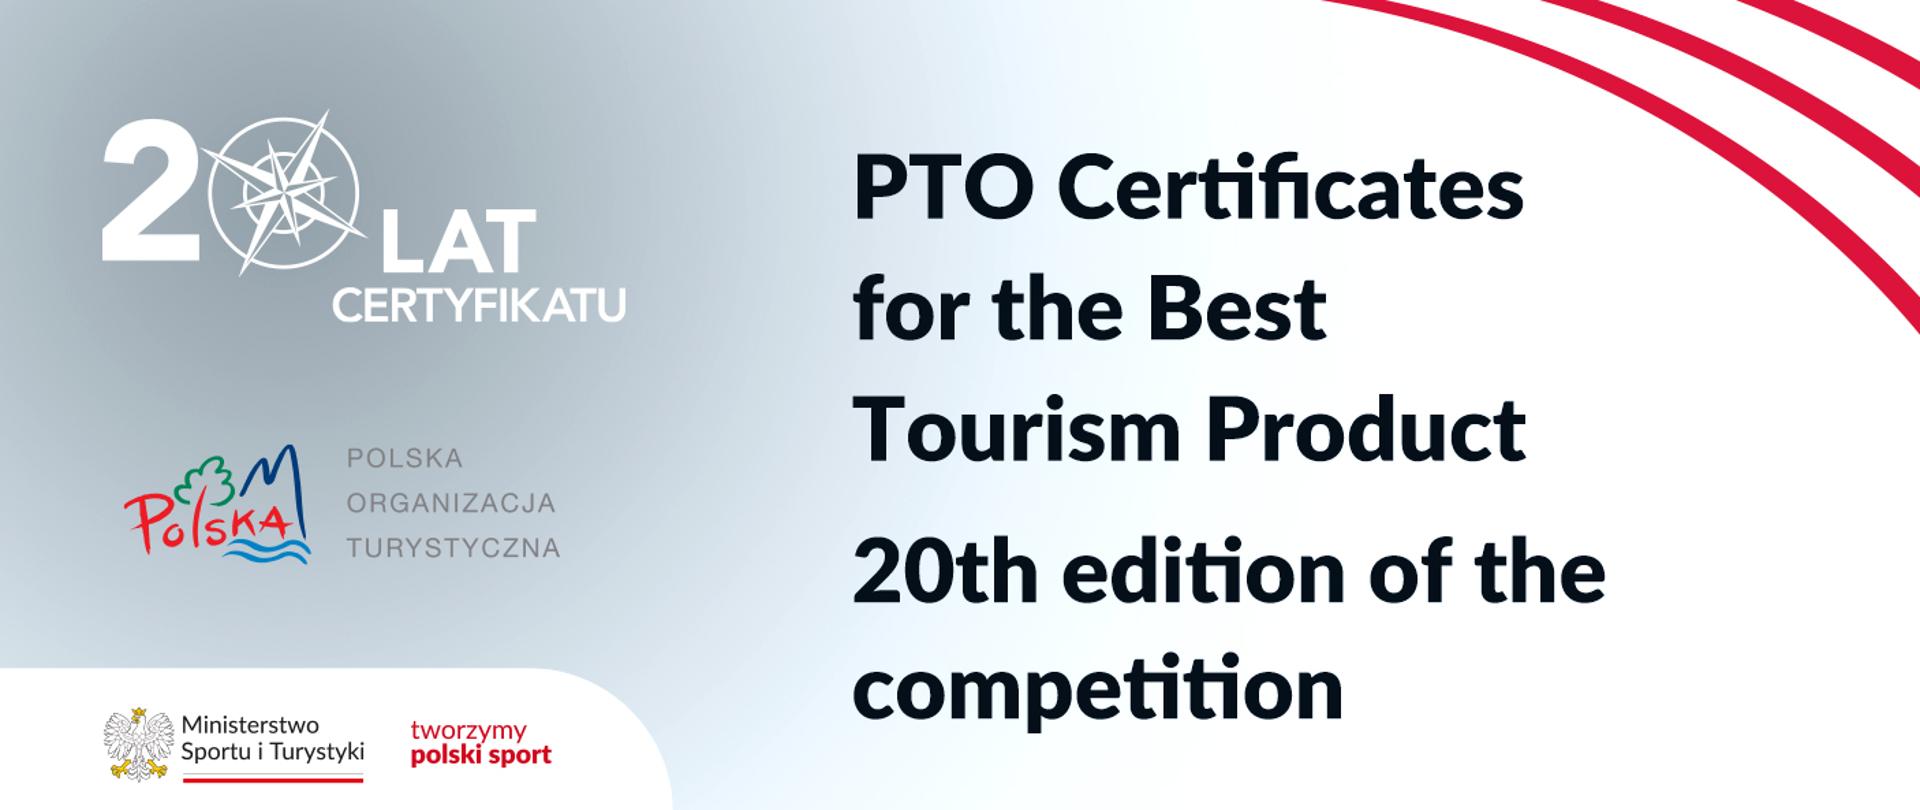 banner with information and logos: PTO Certificates for the Best Tourism Product